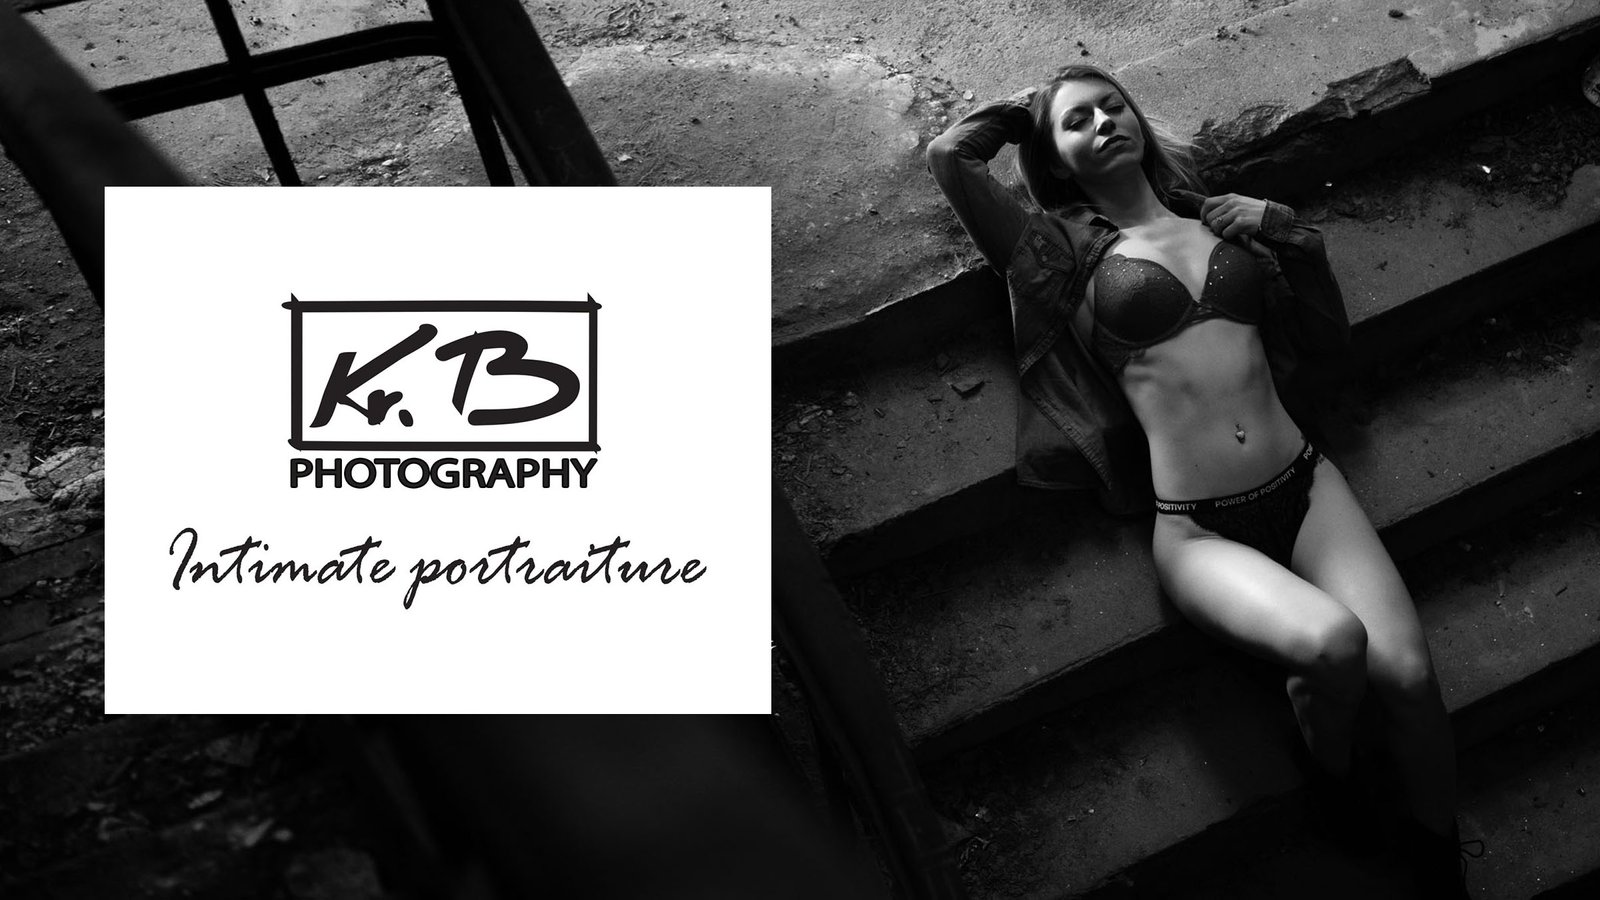 KrB Photography, cover photo 10